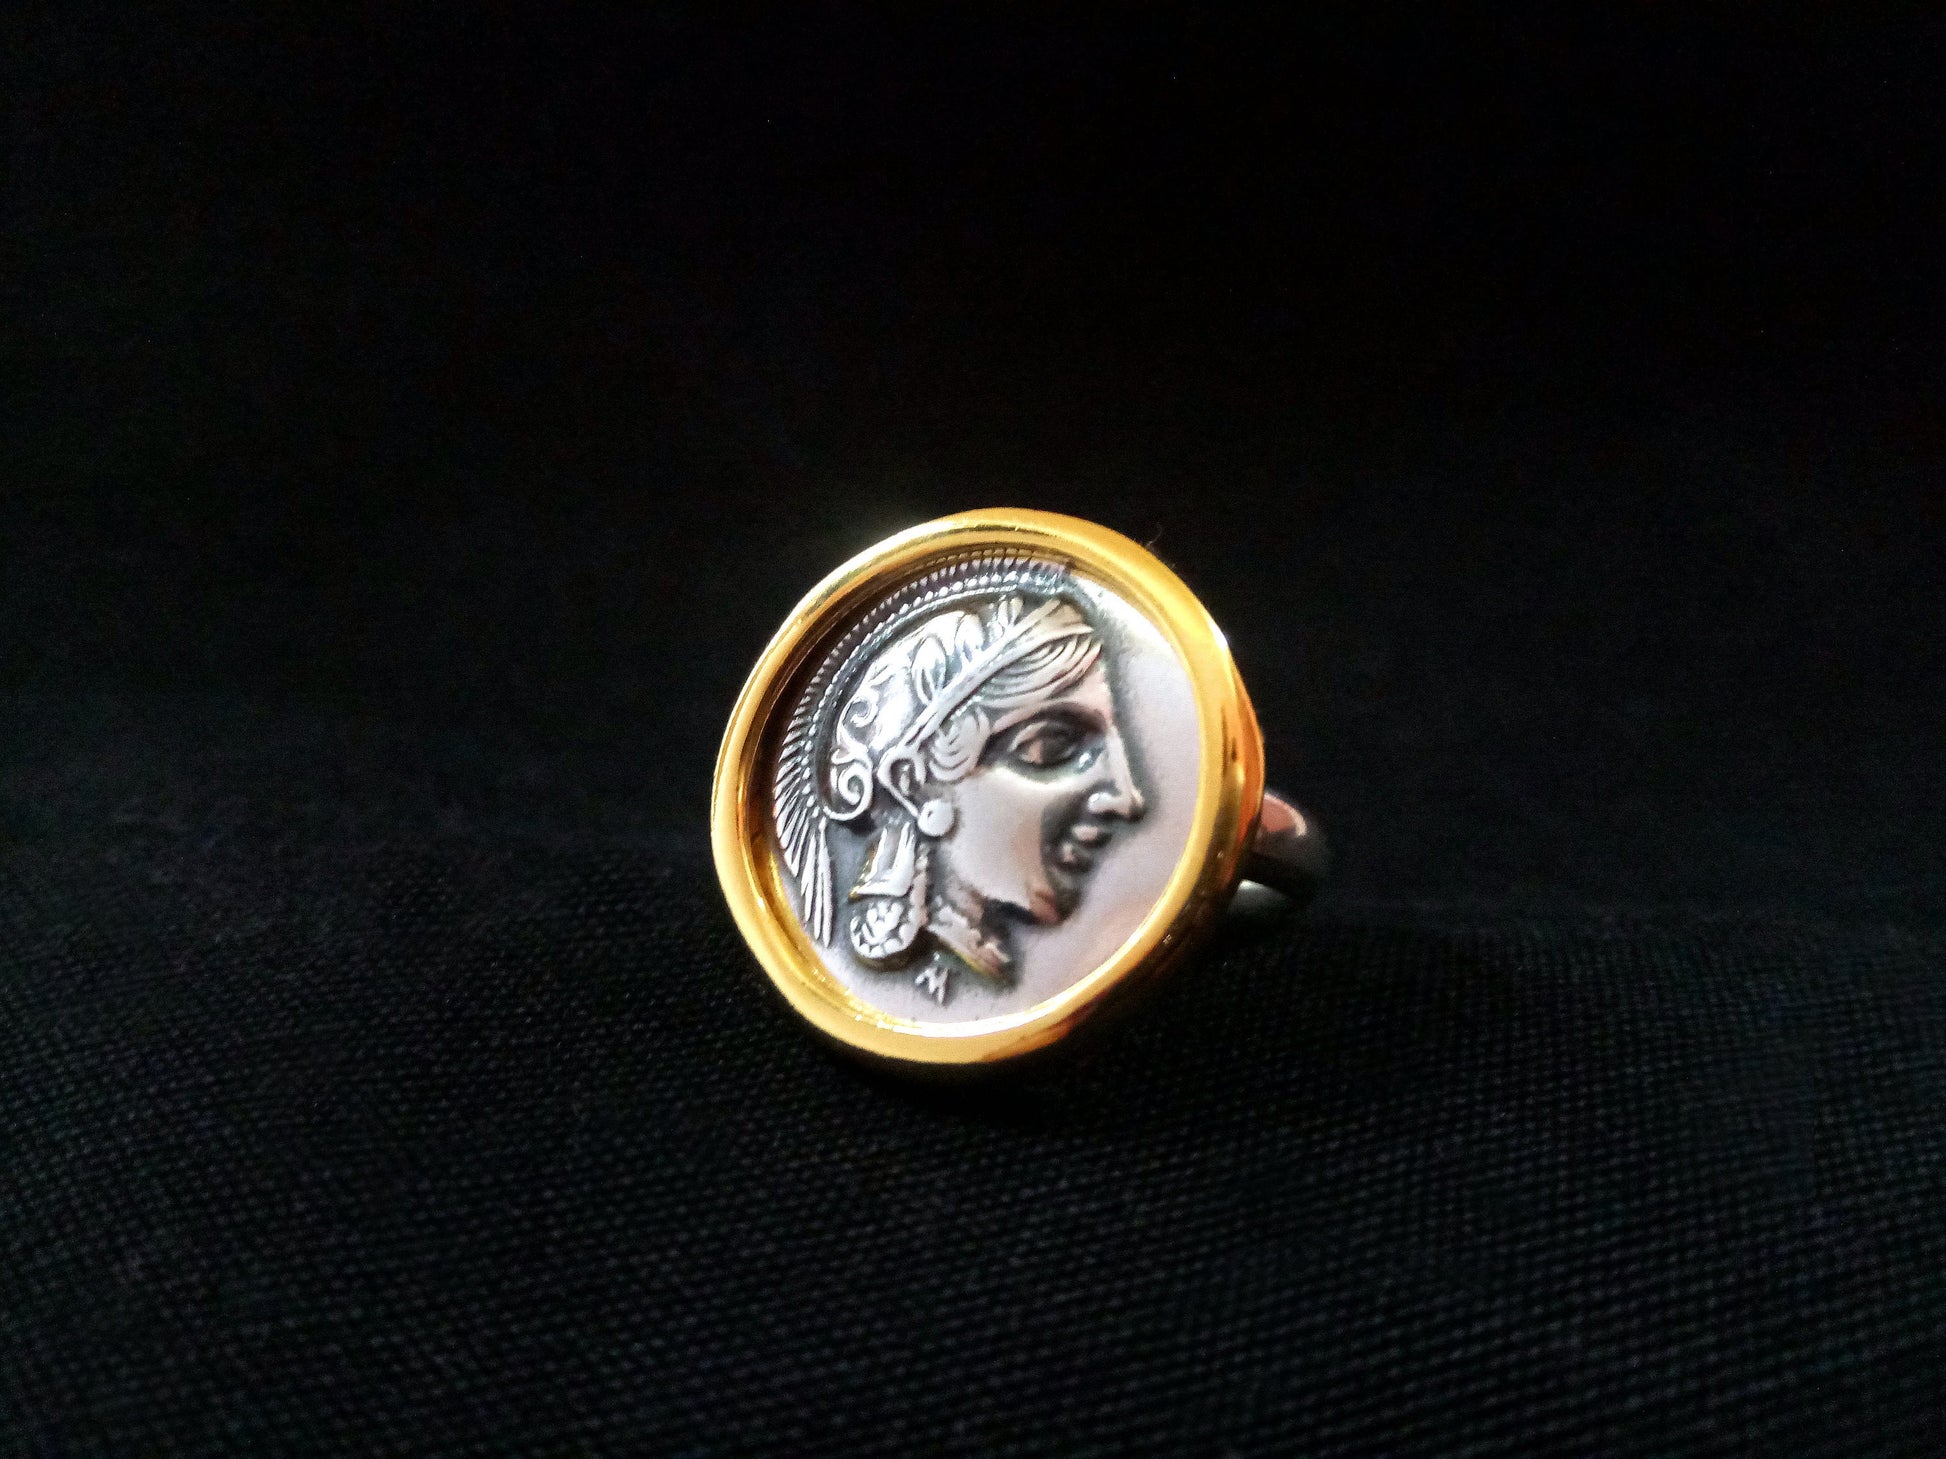 Close-up image of a Greek Silver Jewelry Tetradrachmon Coin Pendant, featuring a depiction of Goddess Athena on a Sterling Silver 925 coin with Gold Plating.